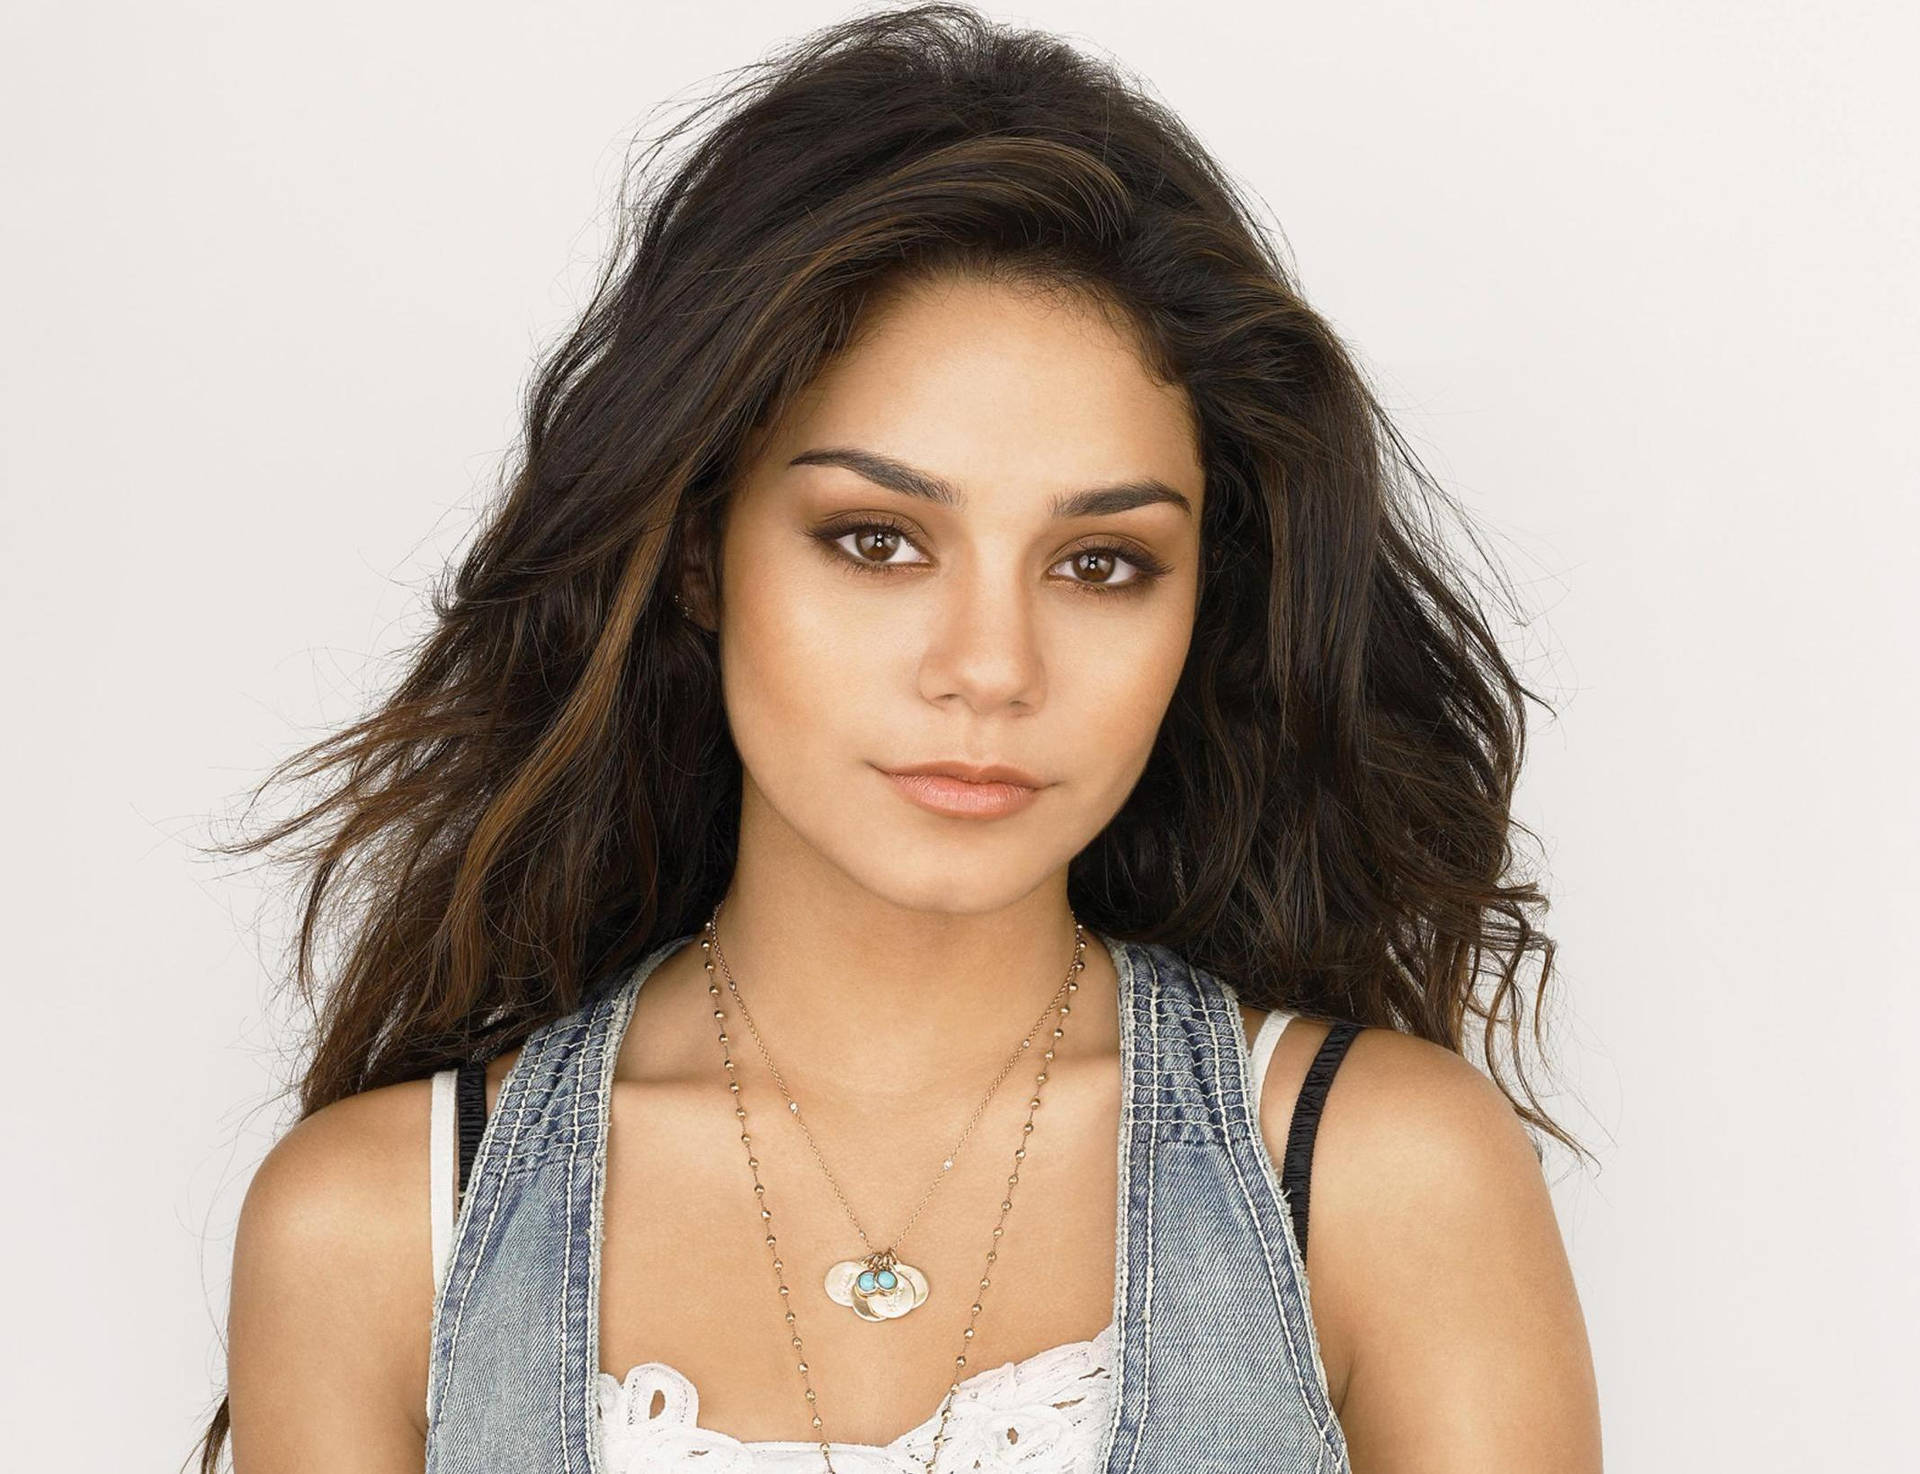 Vanessa Hudgens With A Mesmerizing Expression